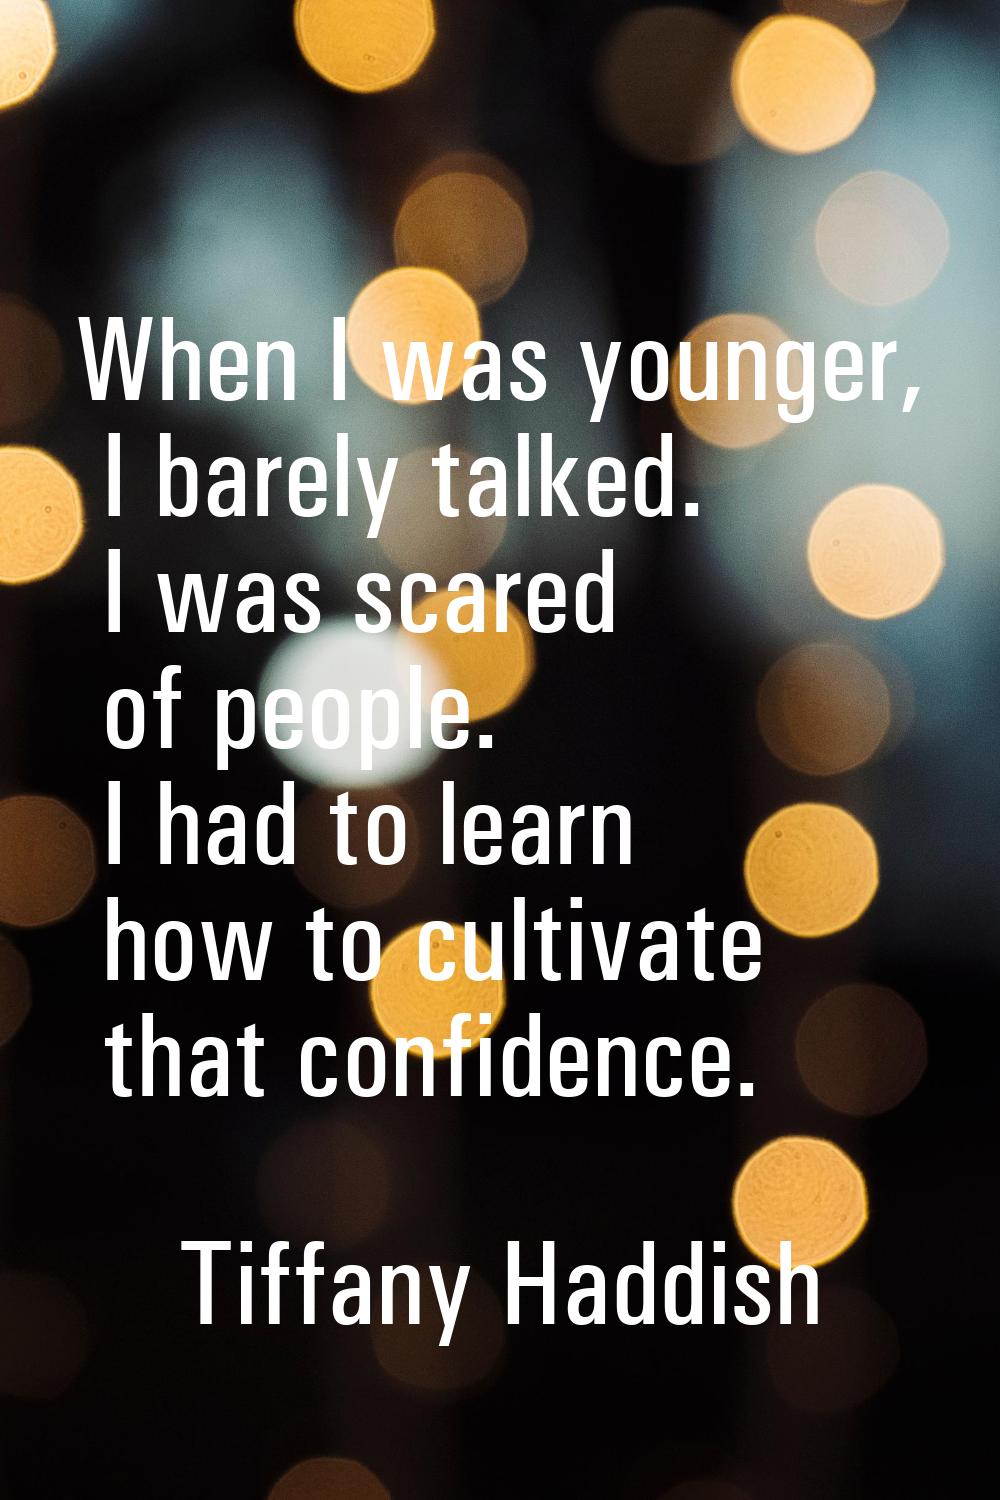 When I was younger, I barely talked. I was scared of people. I had to learn how to cultivate that c